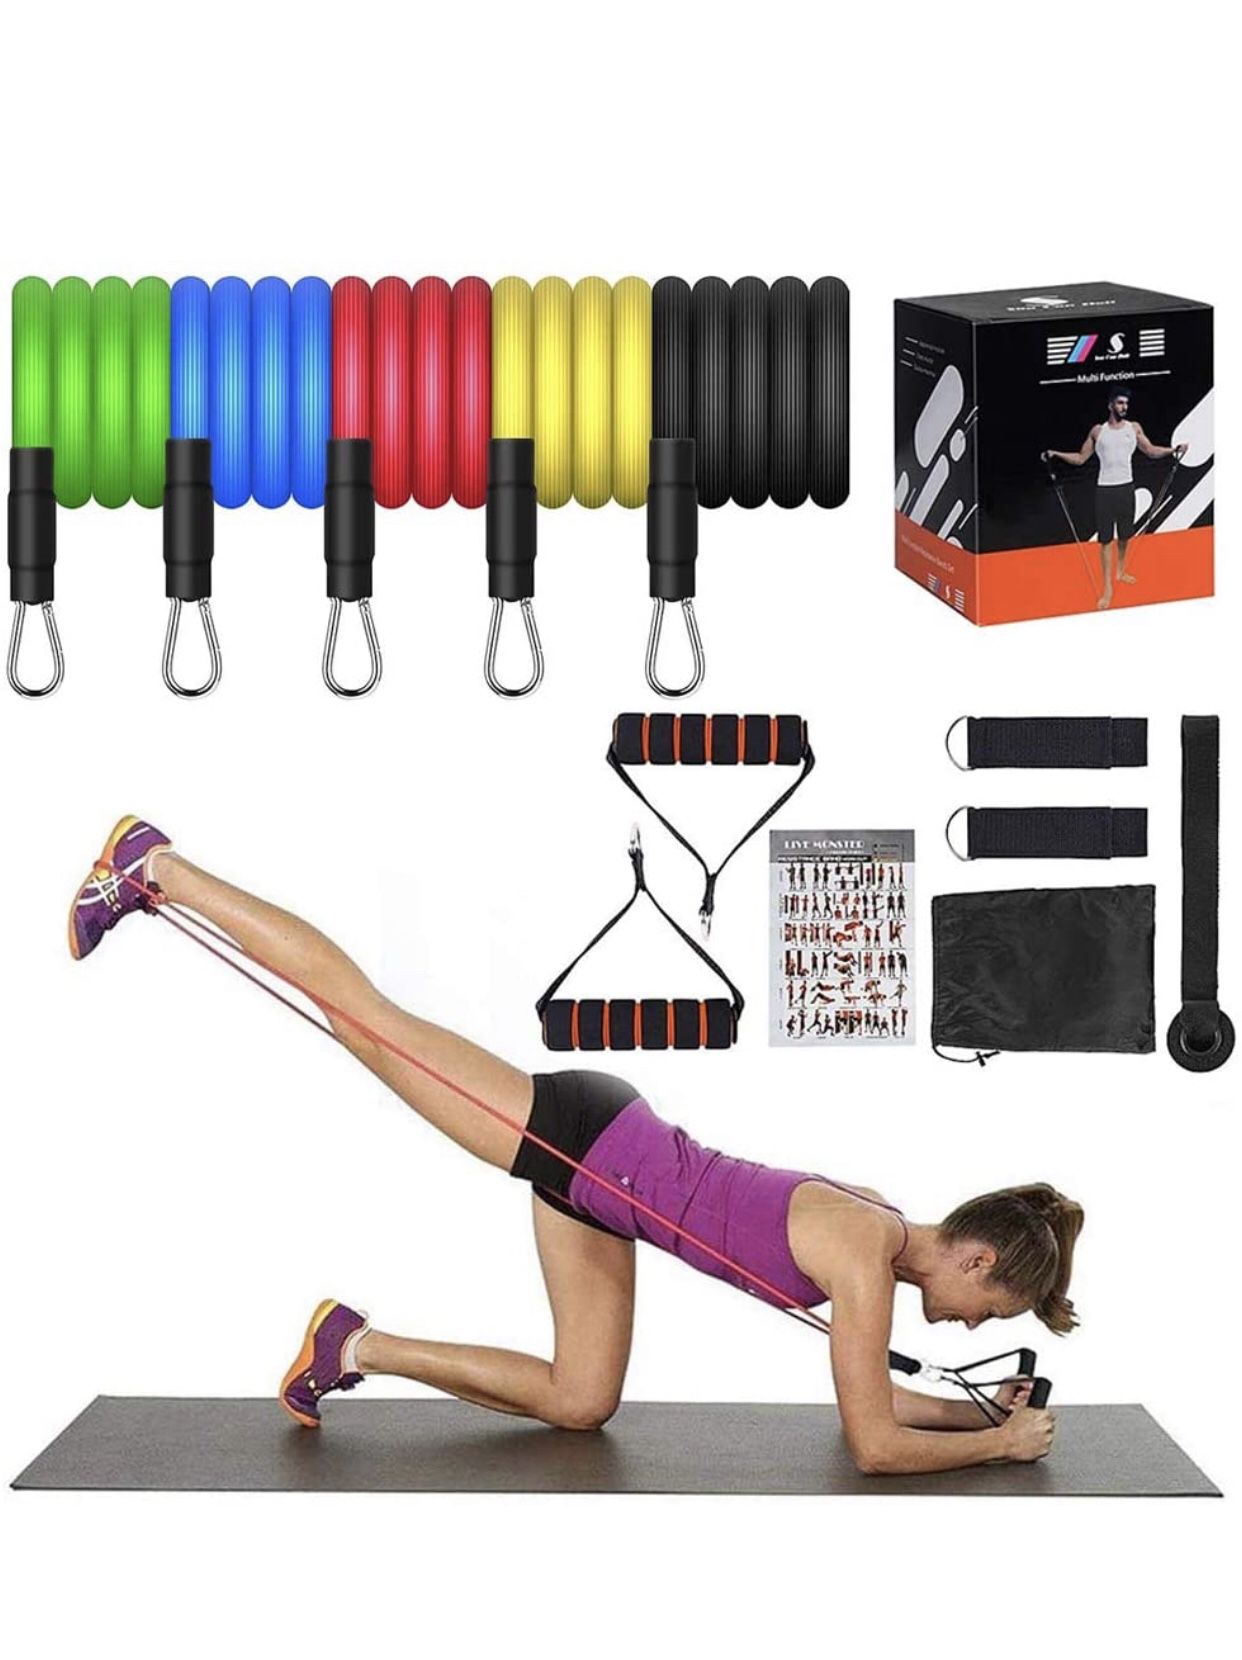 Exercise Resistance Bands Set,Fitness Stretch Workout Bands 11PC with Fitness Tubes, Foam Handles, Ankle Straps, Door Anchor for Home Gym Fitness, Sta